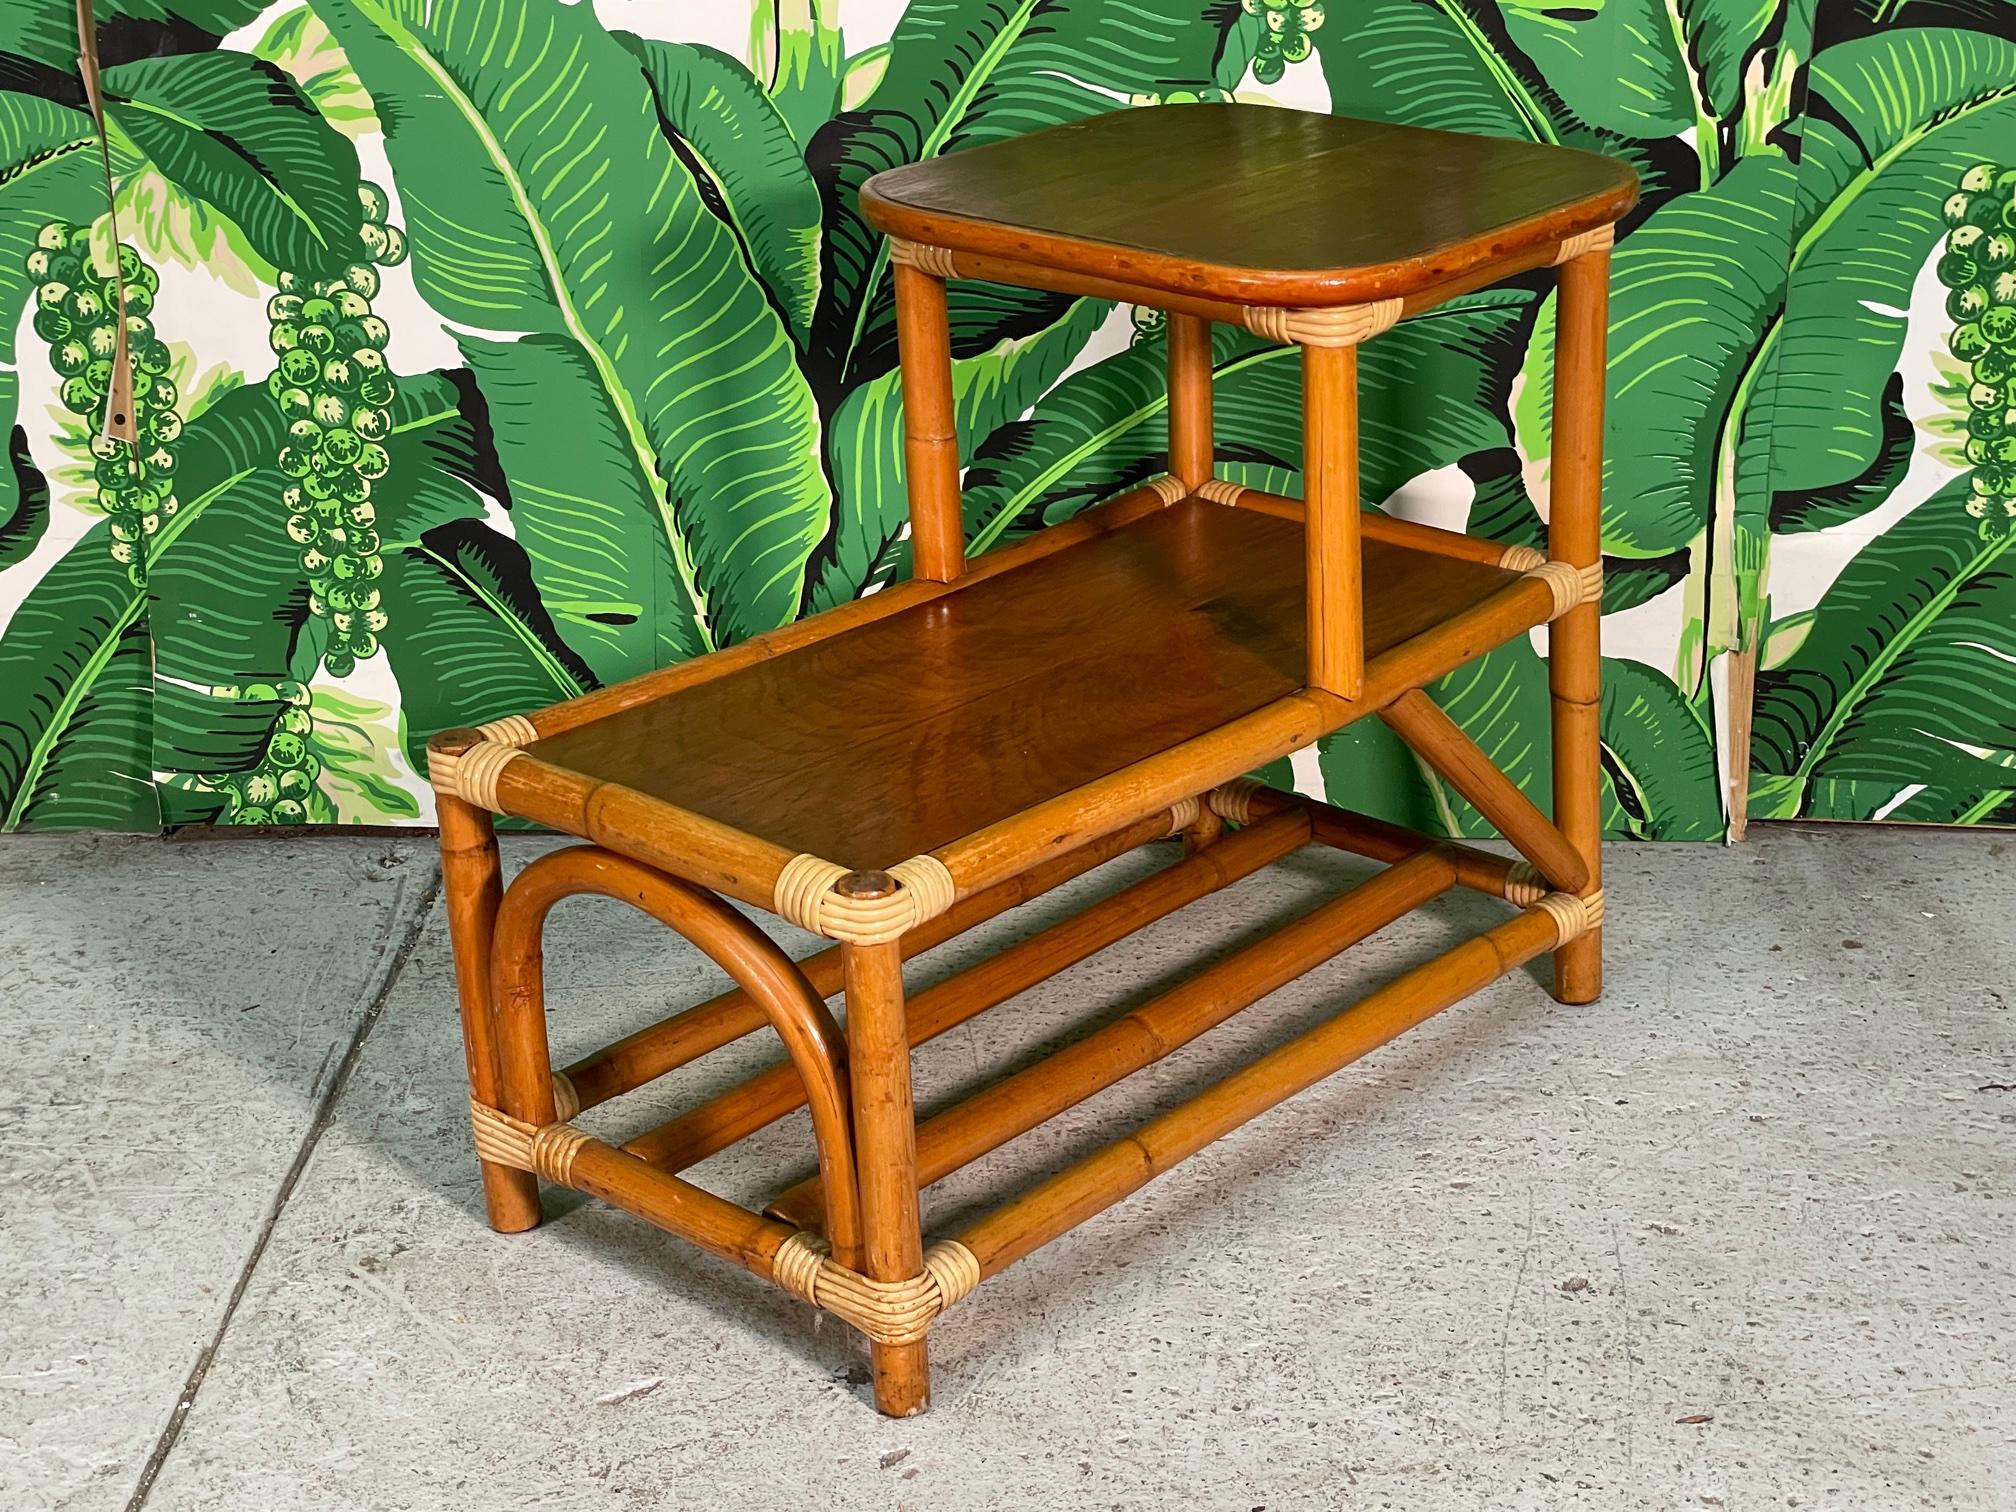 Mid Century Rattan two-tiered side table features mohagany tops and contrasting strapping. Horizontal poles between stretchers form lower shelf. Good condition with minor imperfections consistent with age, see photos for condition details. 
For a